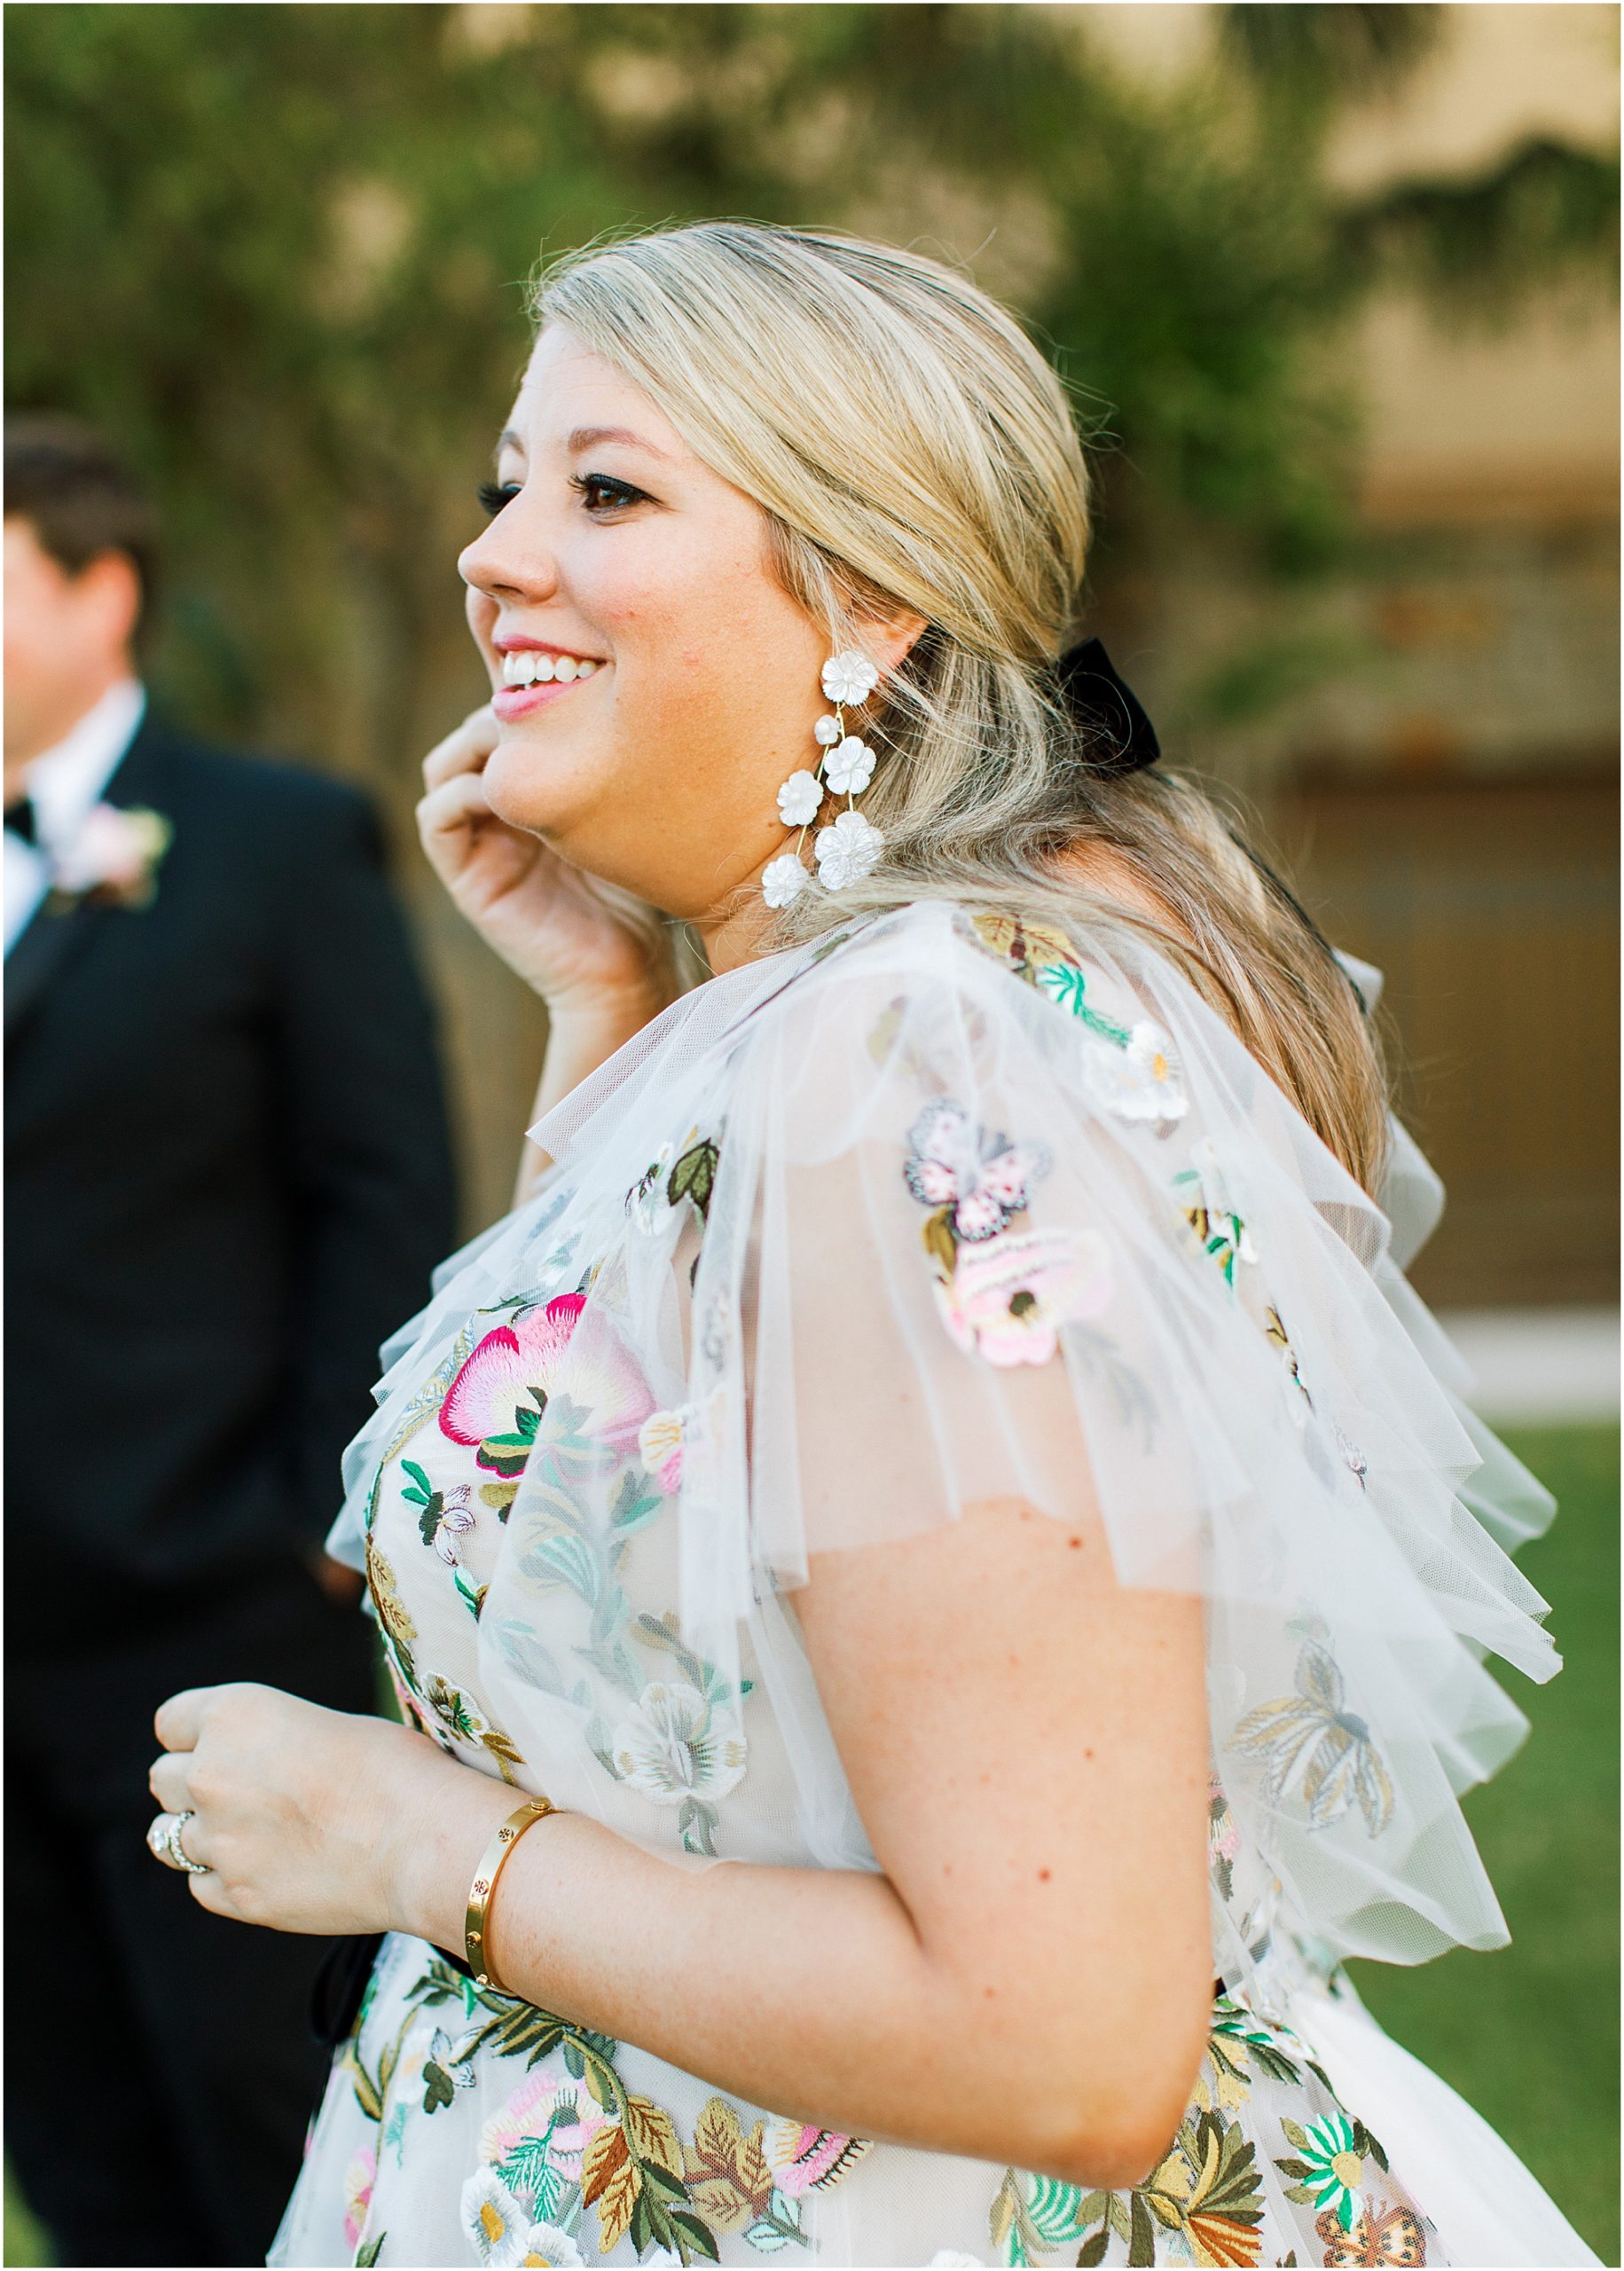 Bride in Monique Lhuillier wedding dress with bright flowers and butterflies